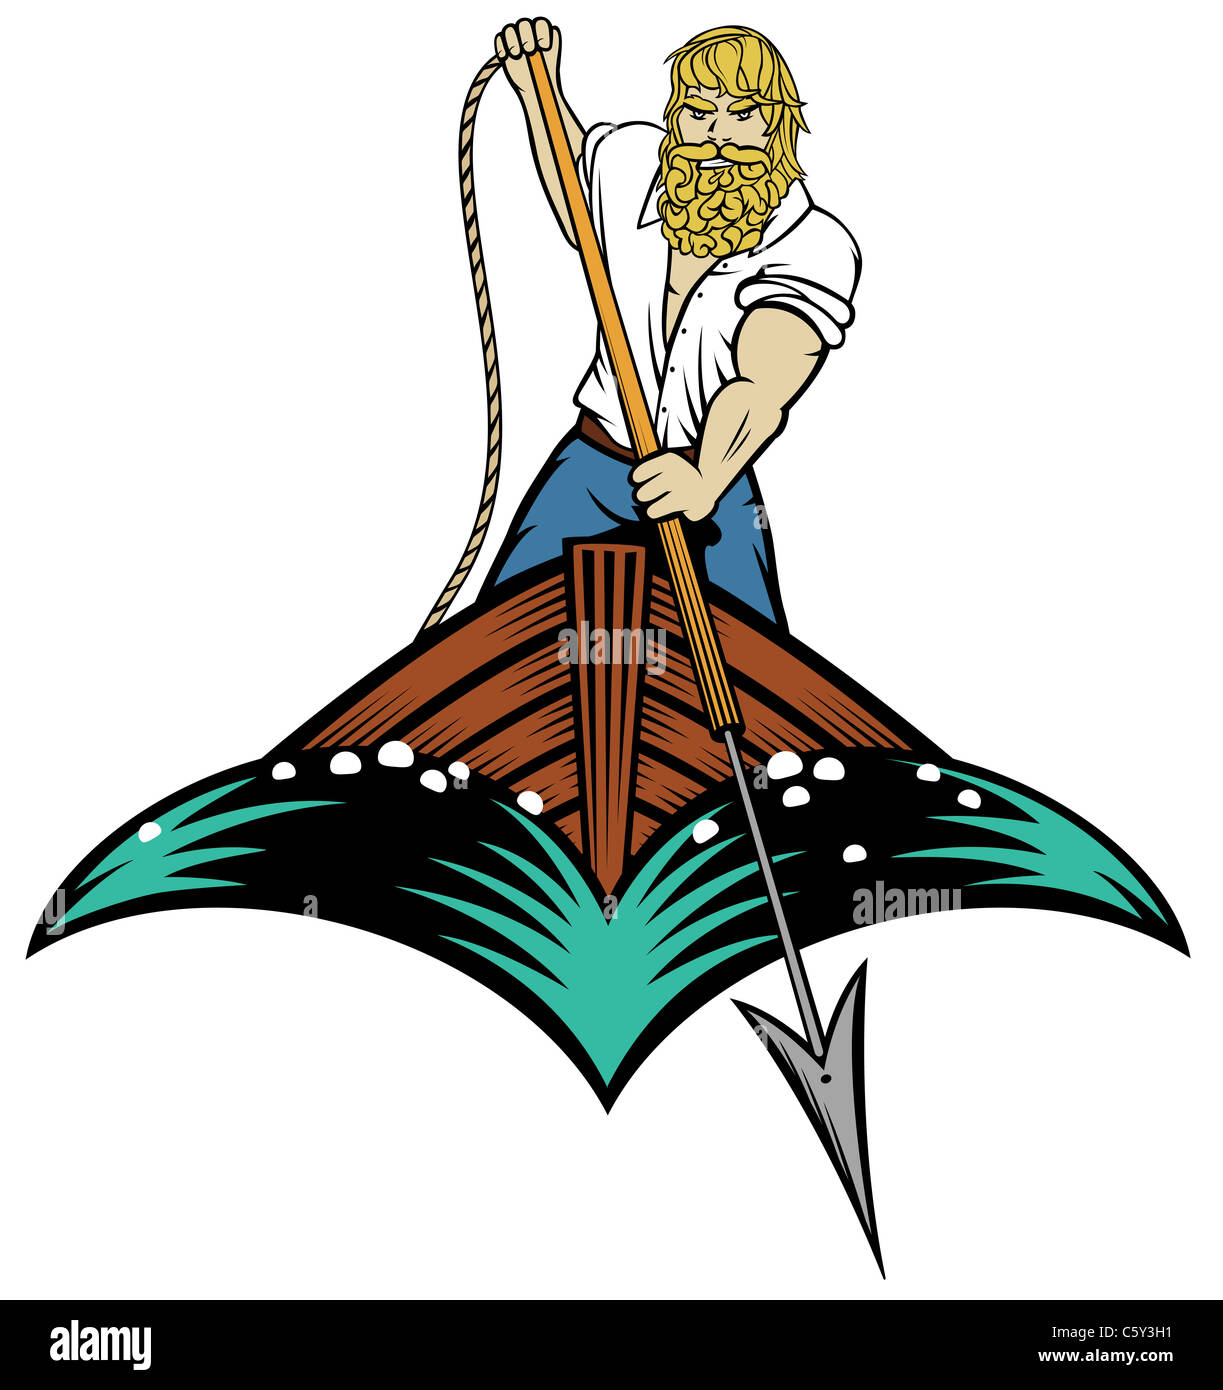 Illustration of a man about to throw a harpoon from a boat in woodcut style Stock Photo